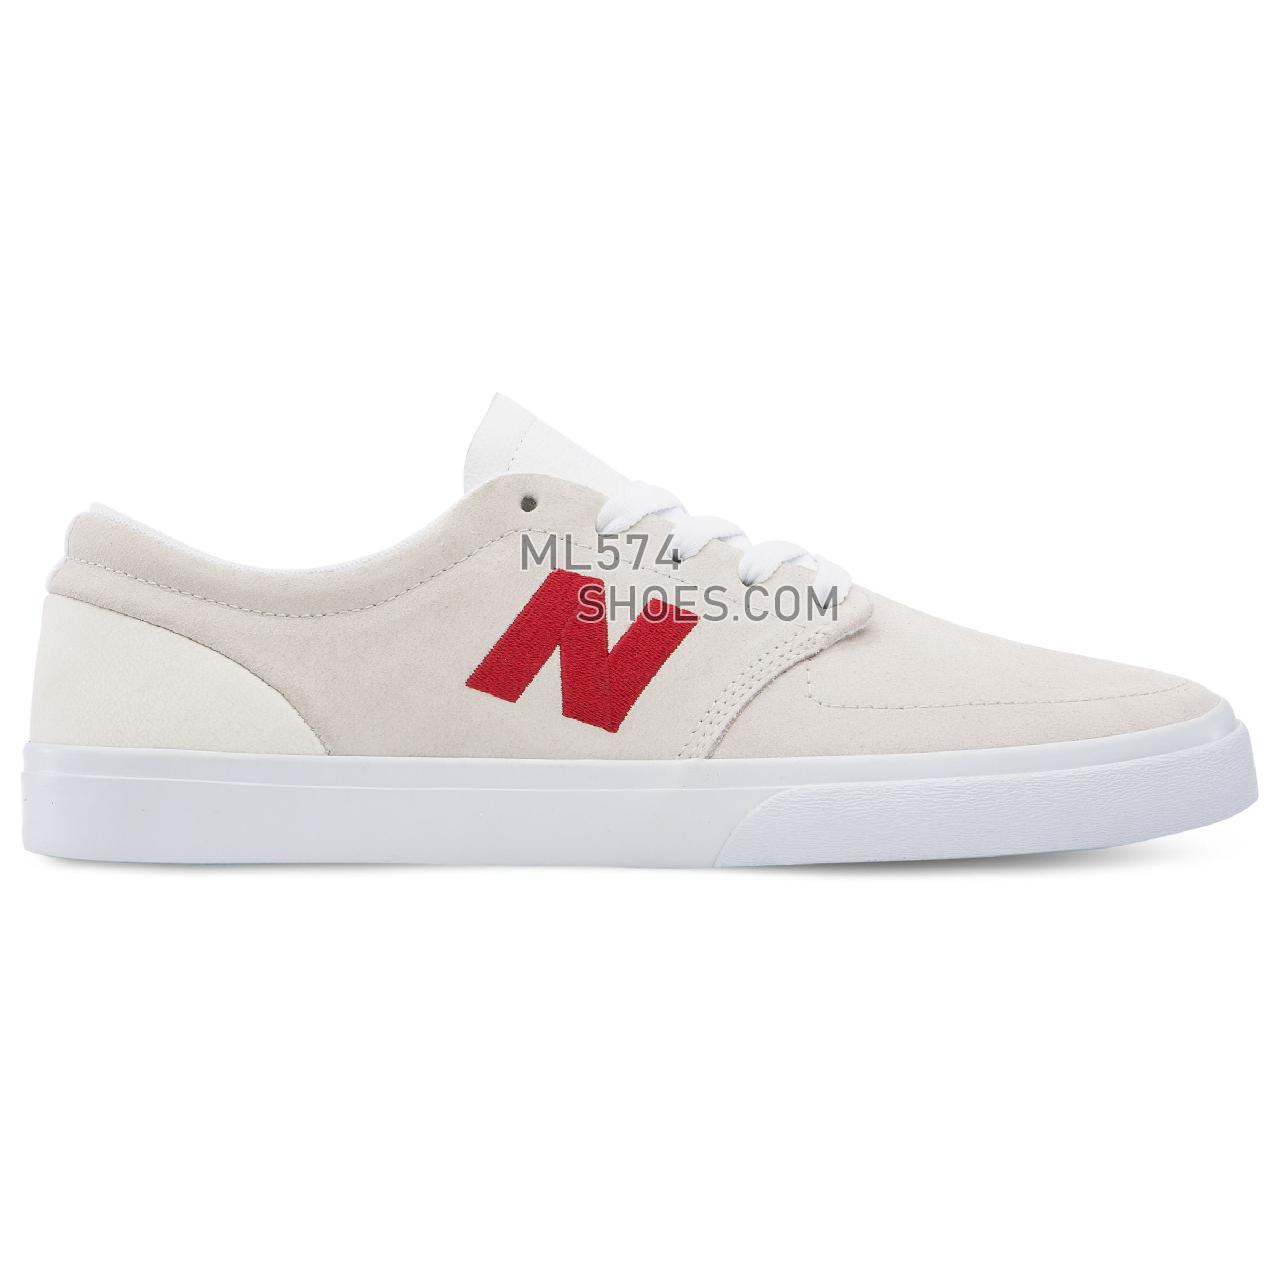 New Balance 345 - Men's 345 - Classic White with Red - NM345WWR